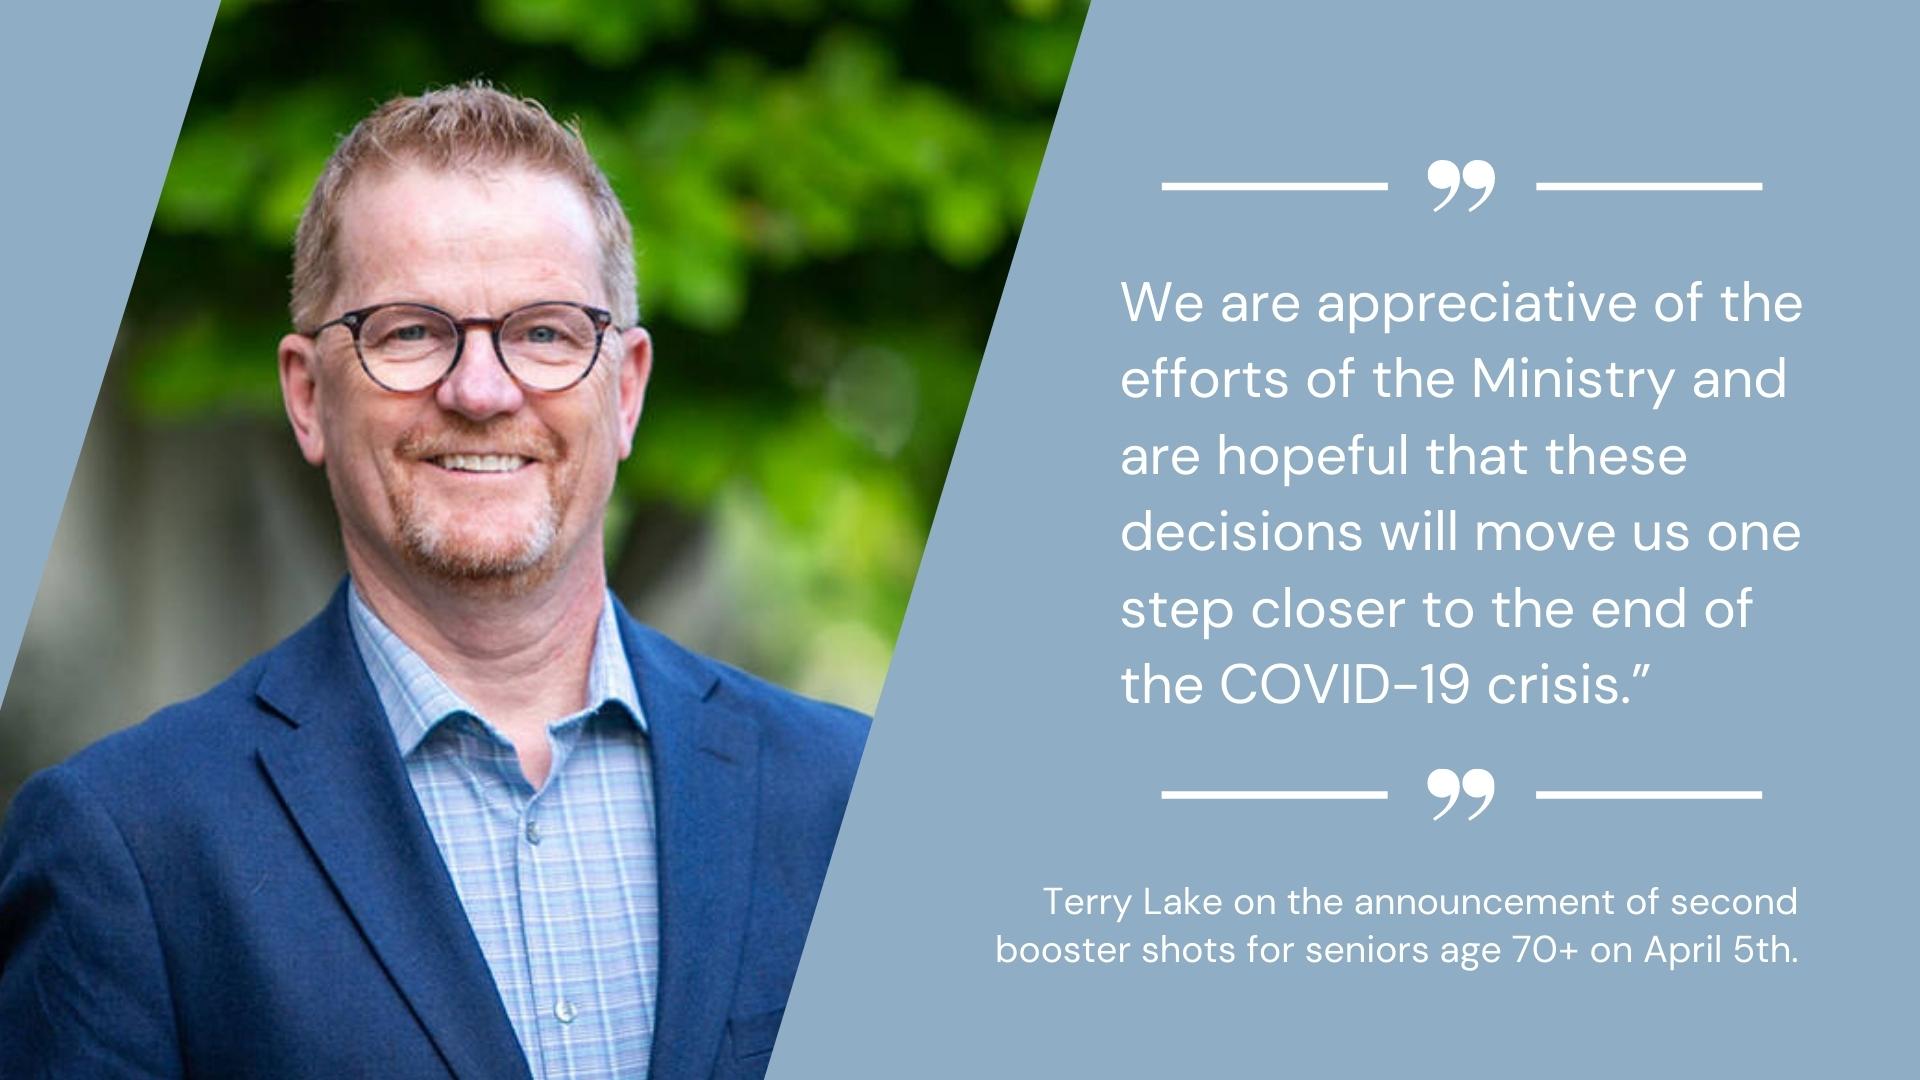 Statement from Terry Lake, CEO on Fourth Doses of COVID-19 Vaccine